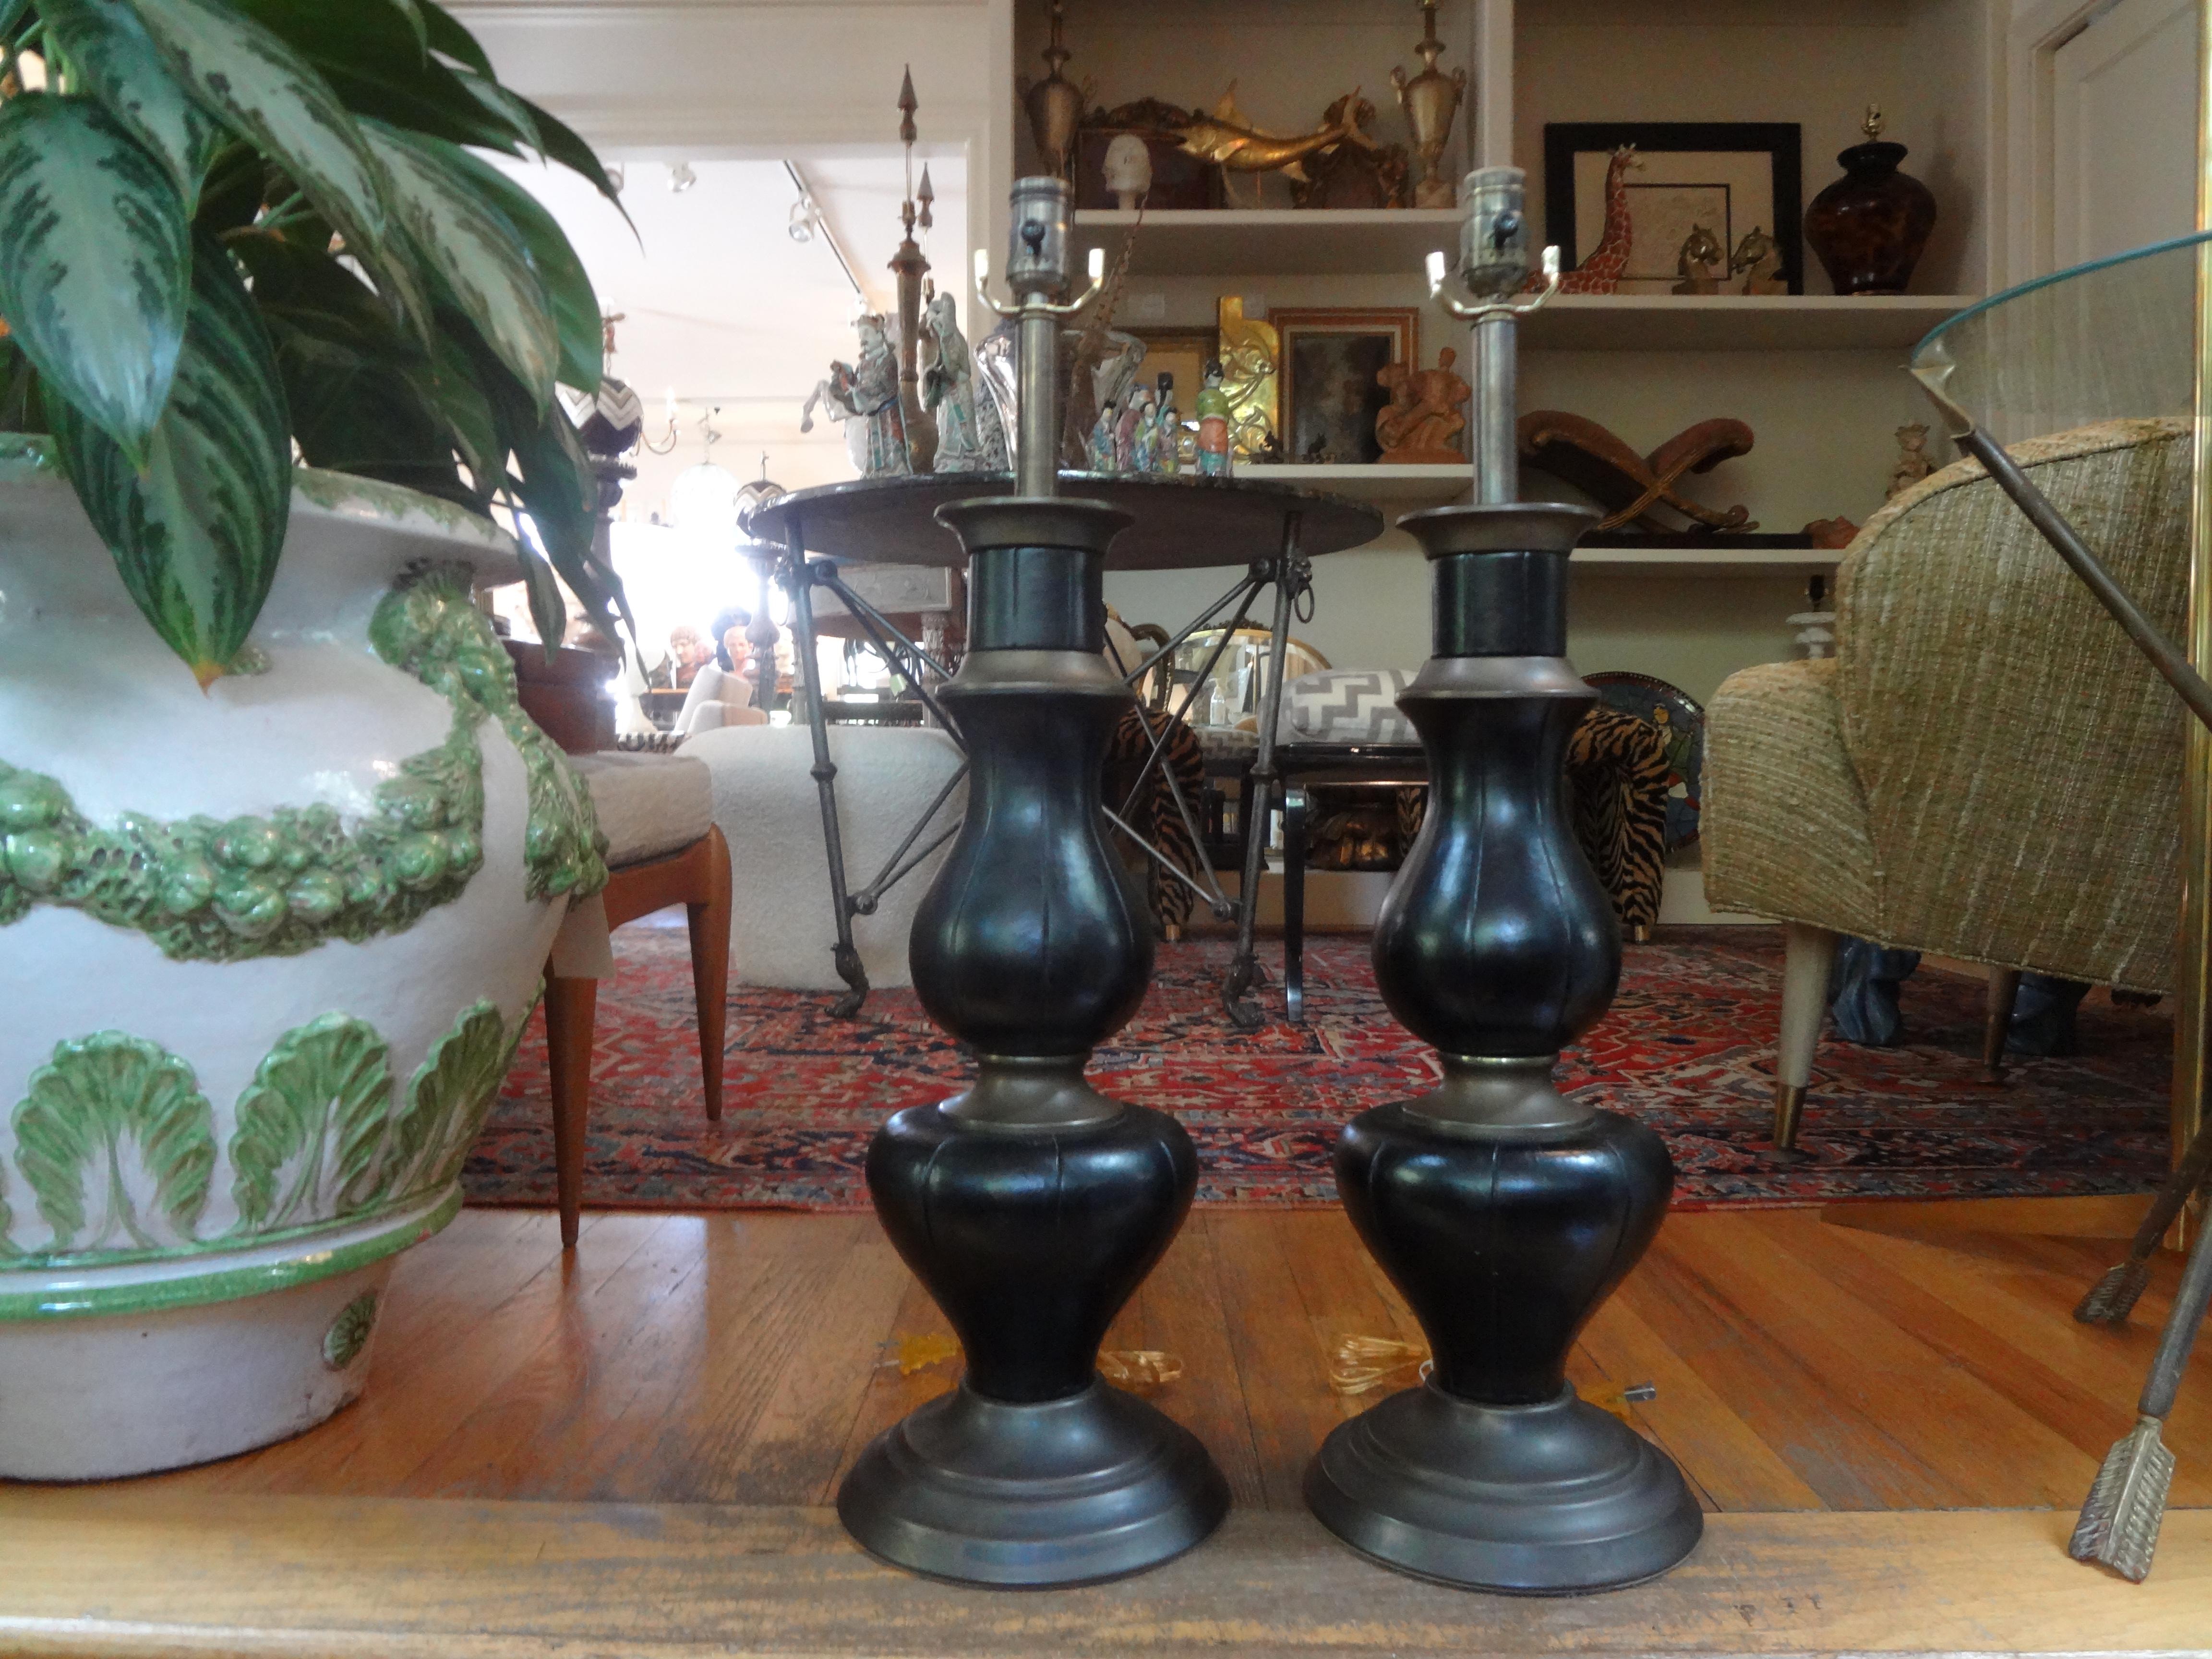 Pair of James Mont inspired brass and leather lamps.
Fantastic pair of vintage sculptural brass and leather table lamps in the style of James Mont. These handsome substantial lamps have been newly wired with new sockets and would work well in a